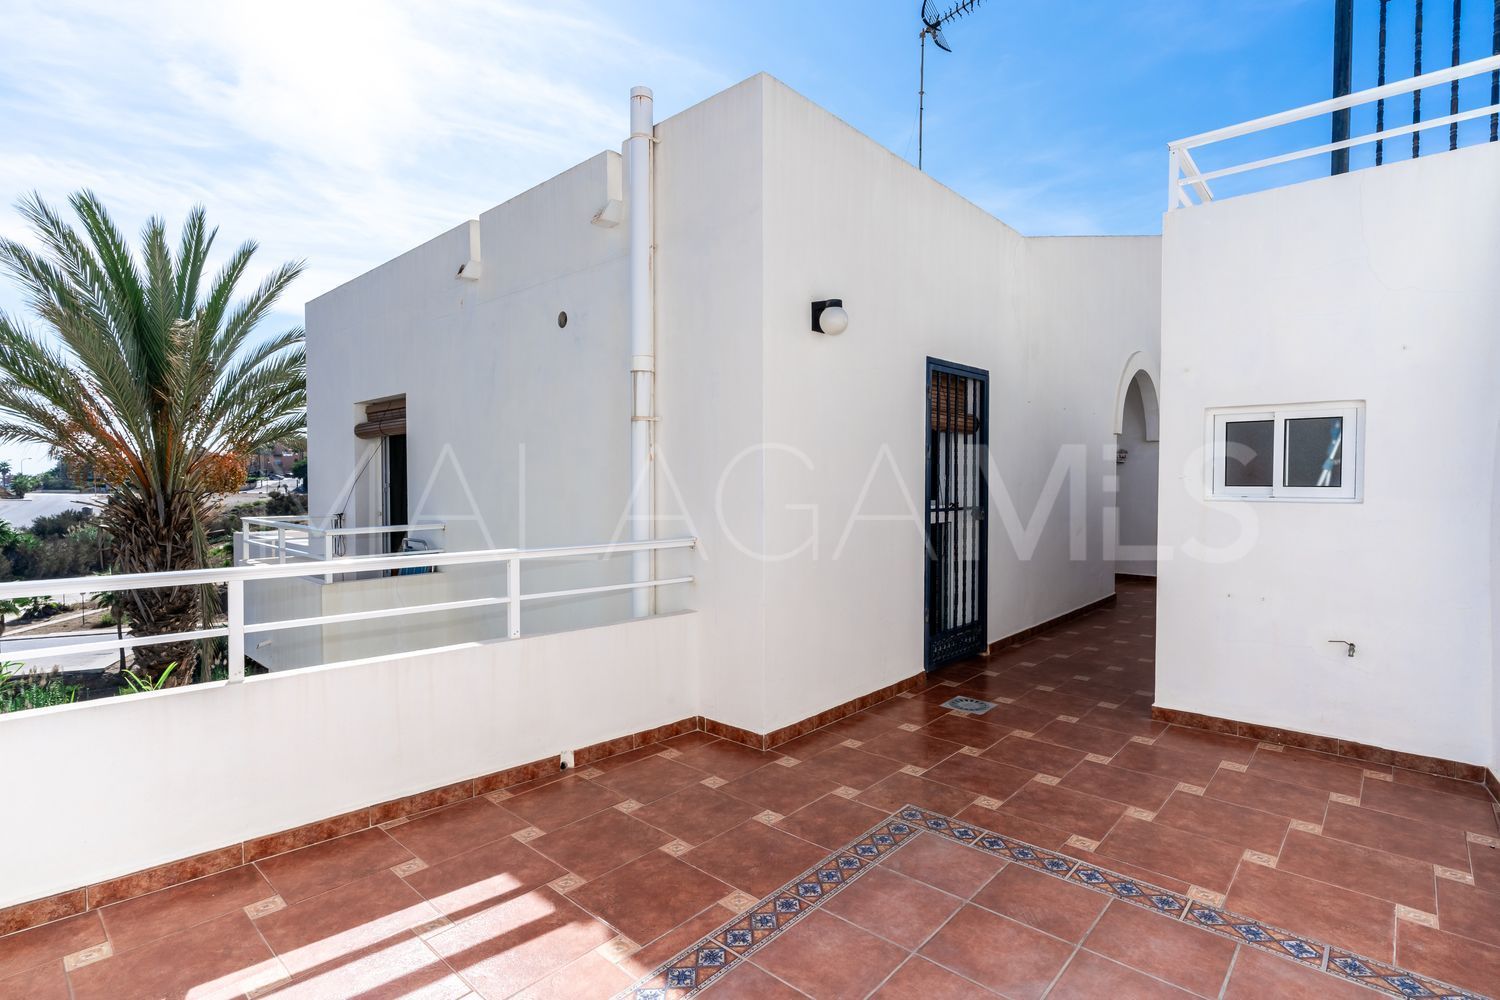 3 bedrooms house for sale in El Chaparral